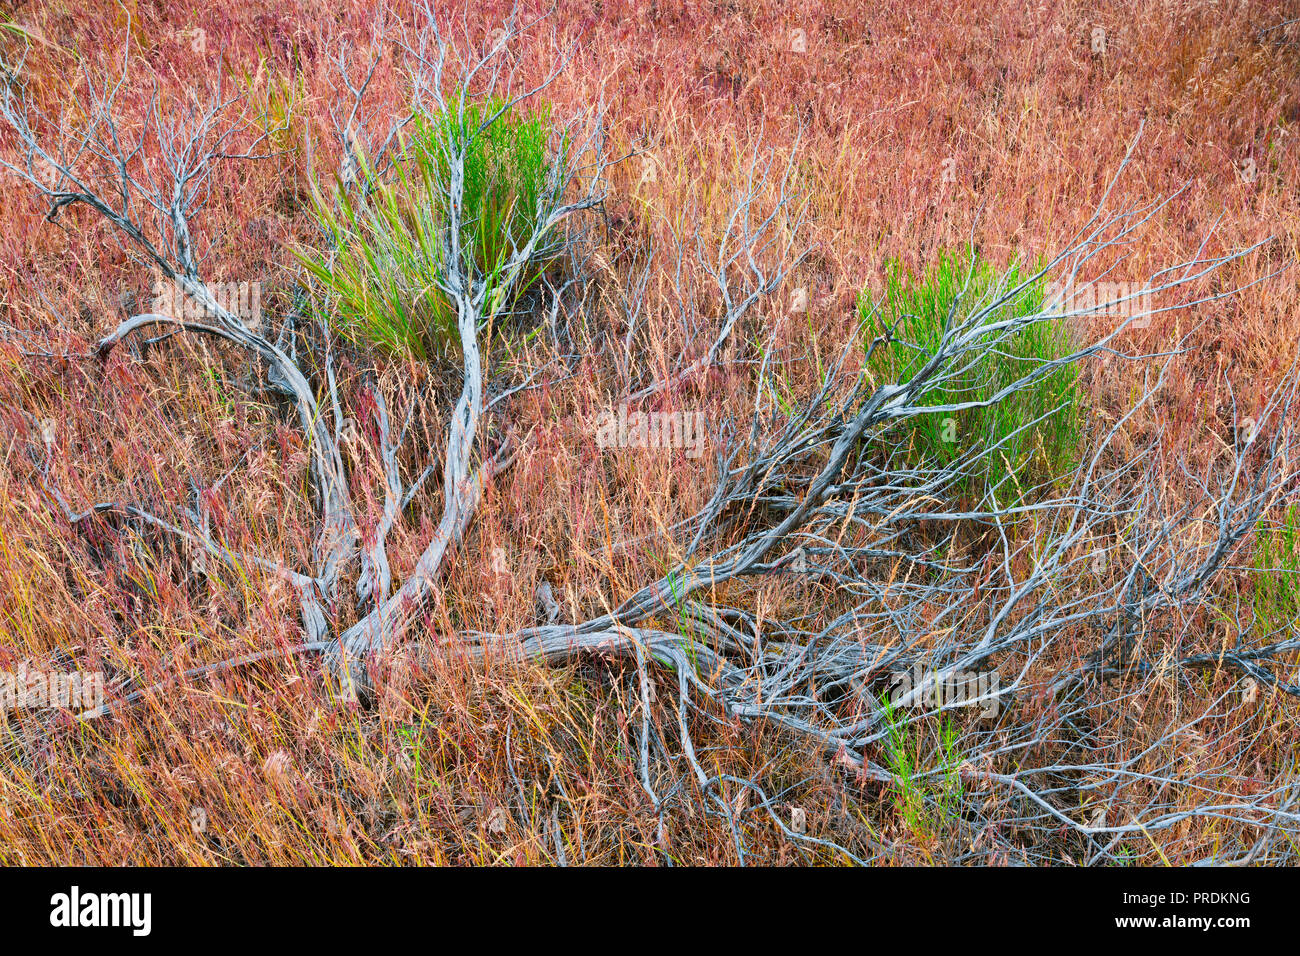 Close up of the natural vegetation one can see in the John Day Fossil Beds National Park in Oregon. Stock Photo